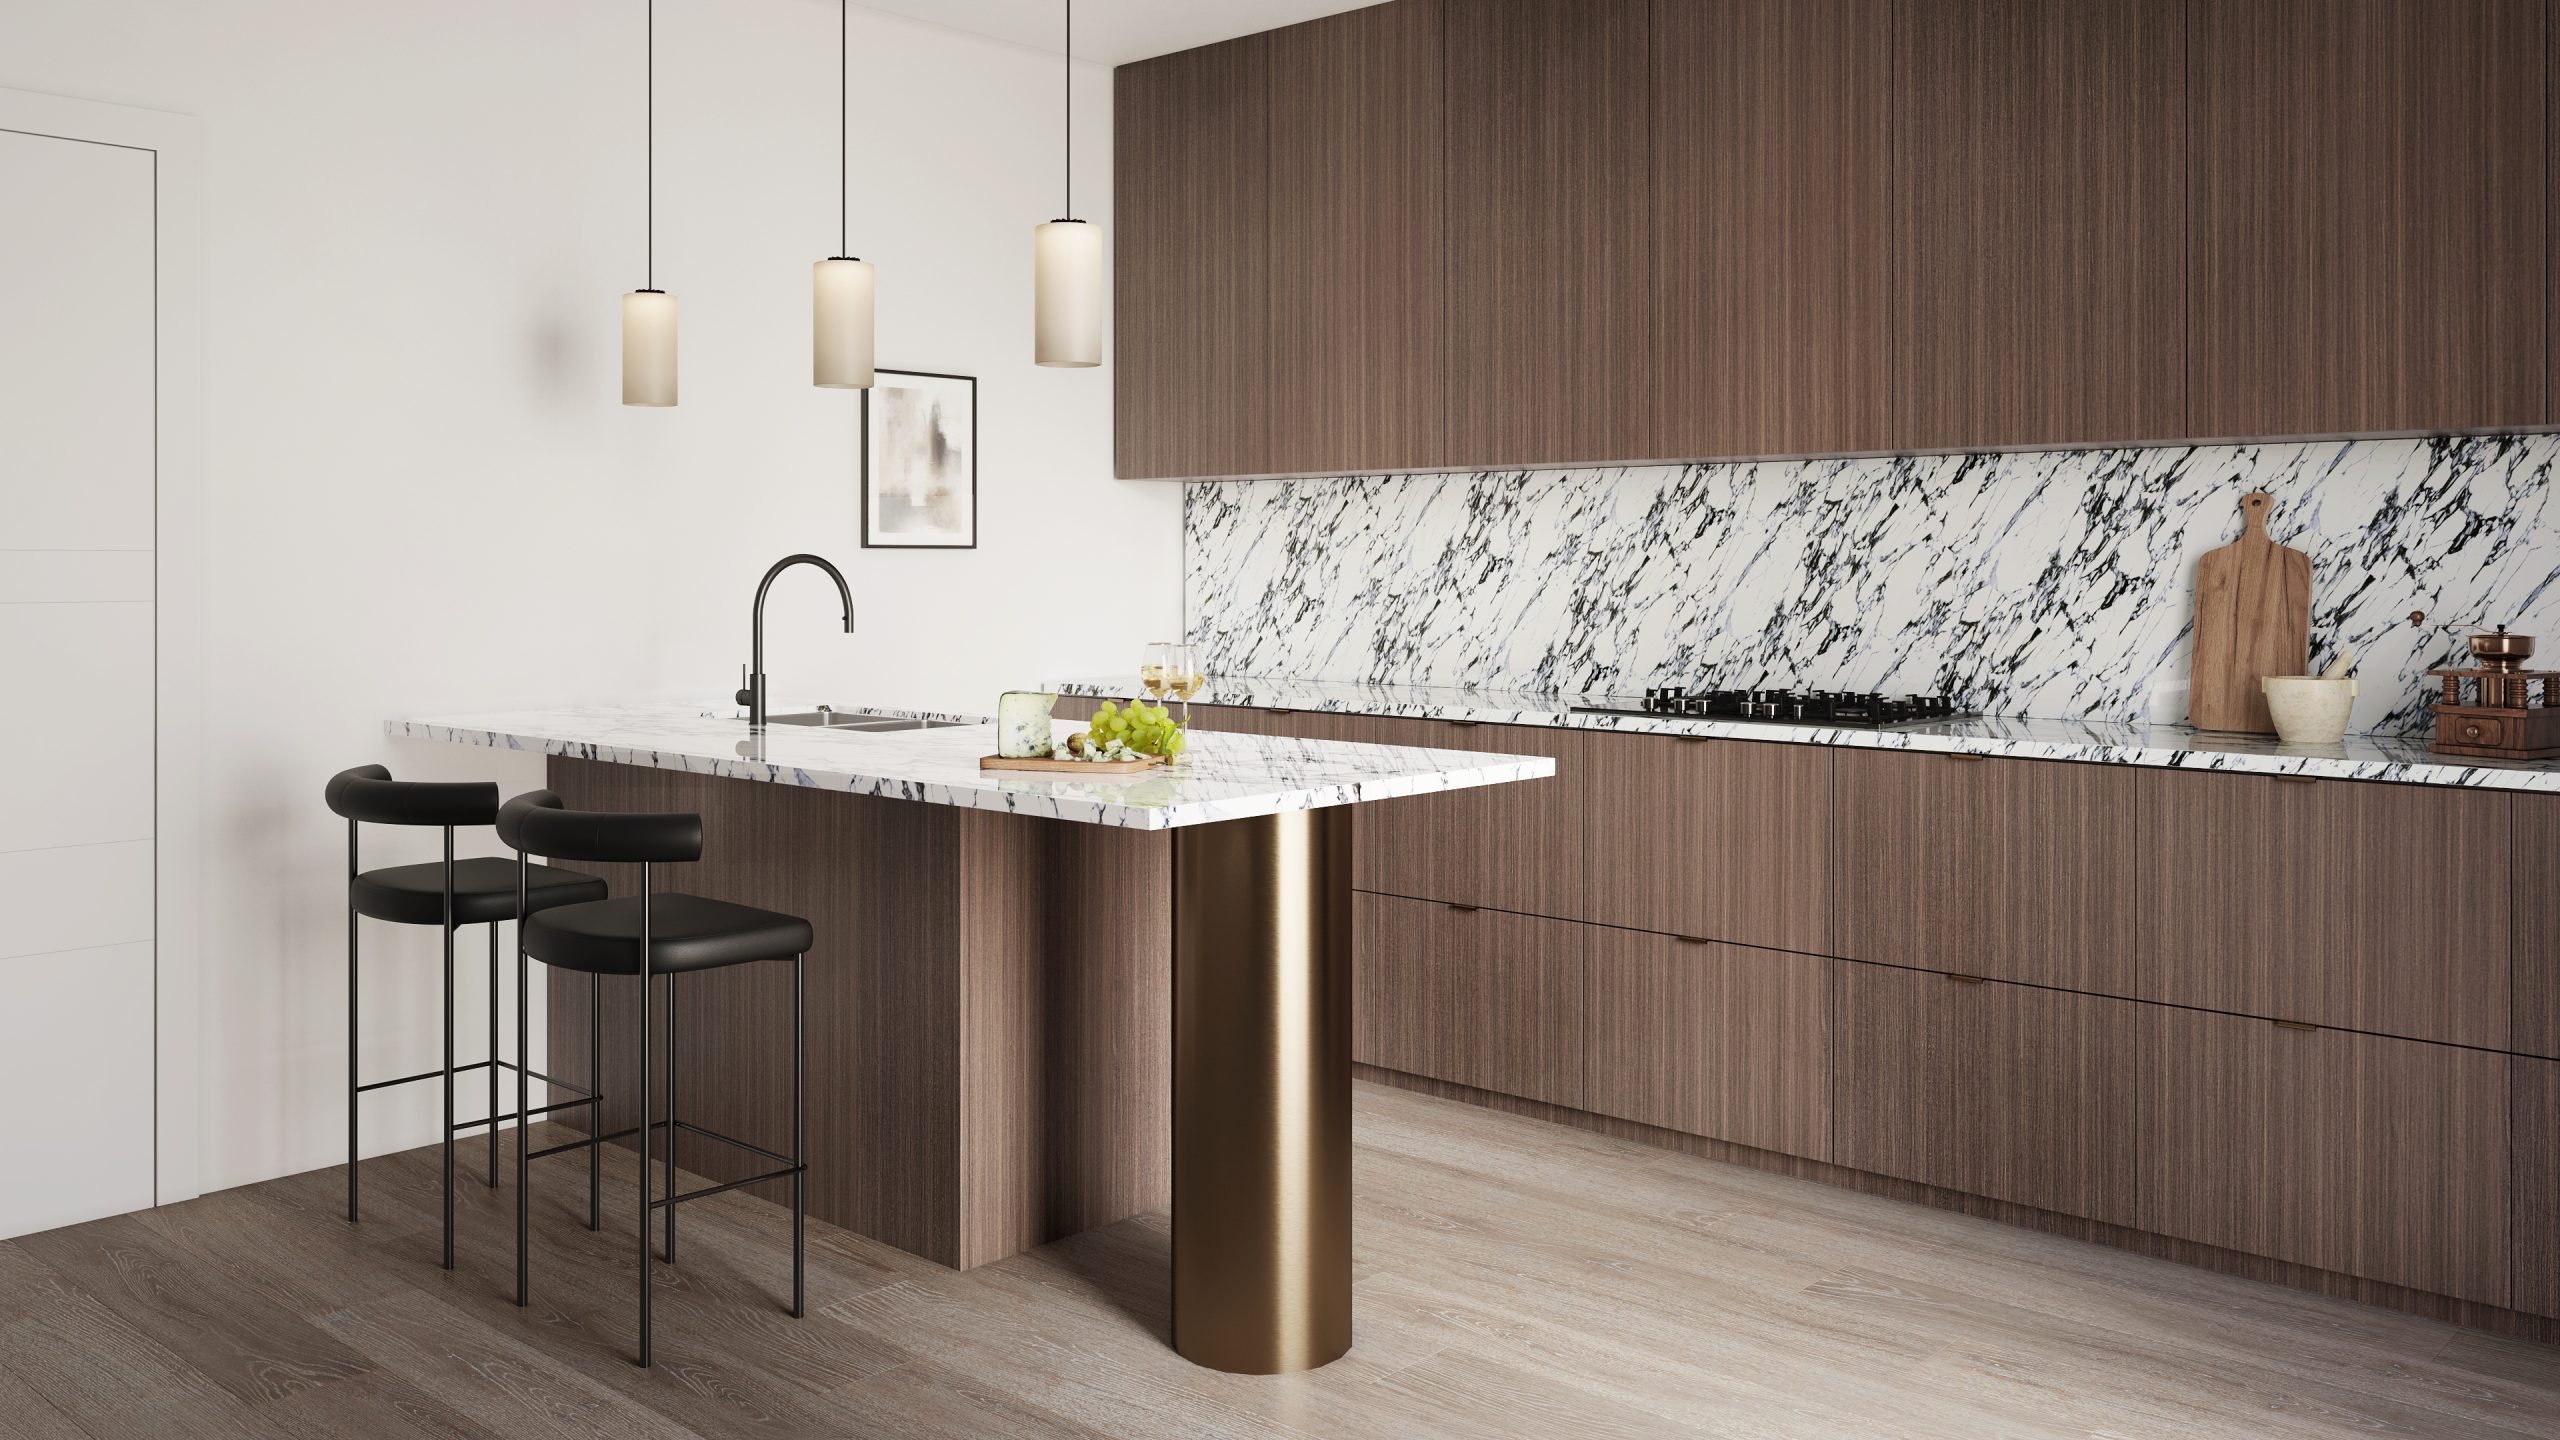 Image of a kitchen with cabinets made with Thermally Fused Laminate in color Espresso by Duramar.